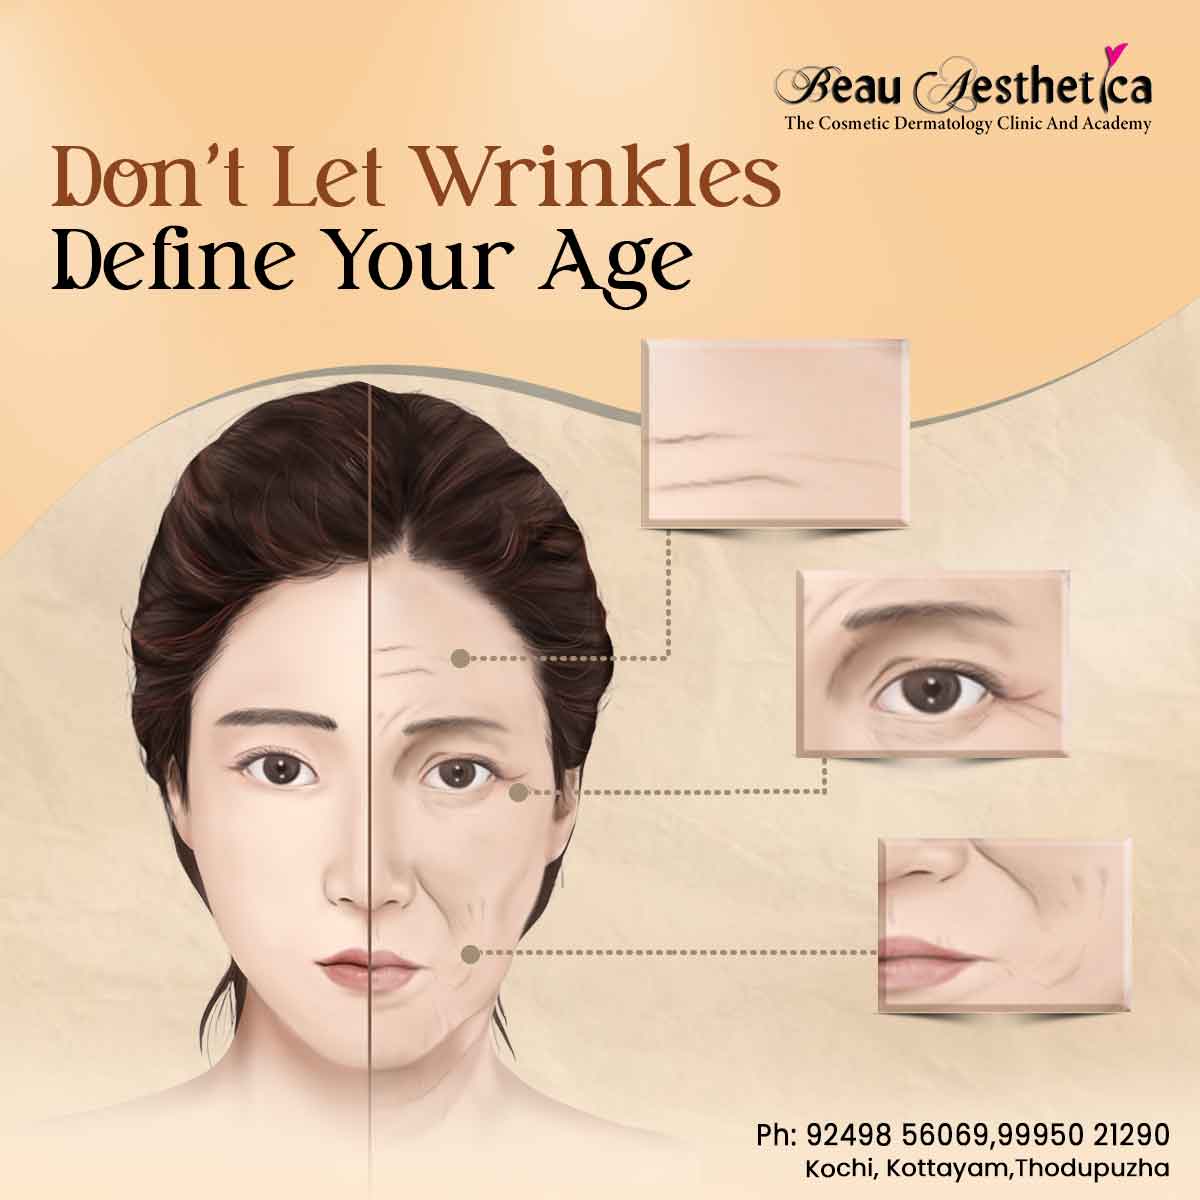 Our advanced wrinkle treatment offers non-invasive solutions to help you reclaim your natural glow. Whether it's fine lines or deep wrinkles, our expert team is here to tailor a solution just for you. For appointment: 92498 56069 / 99950 21290 #WrinkleTreatment #wrinklefree